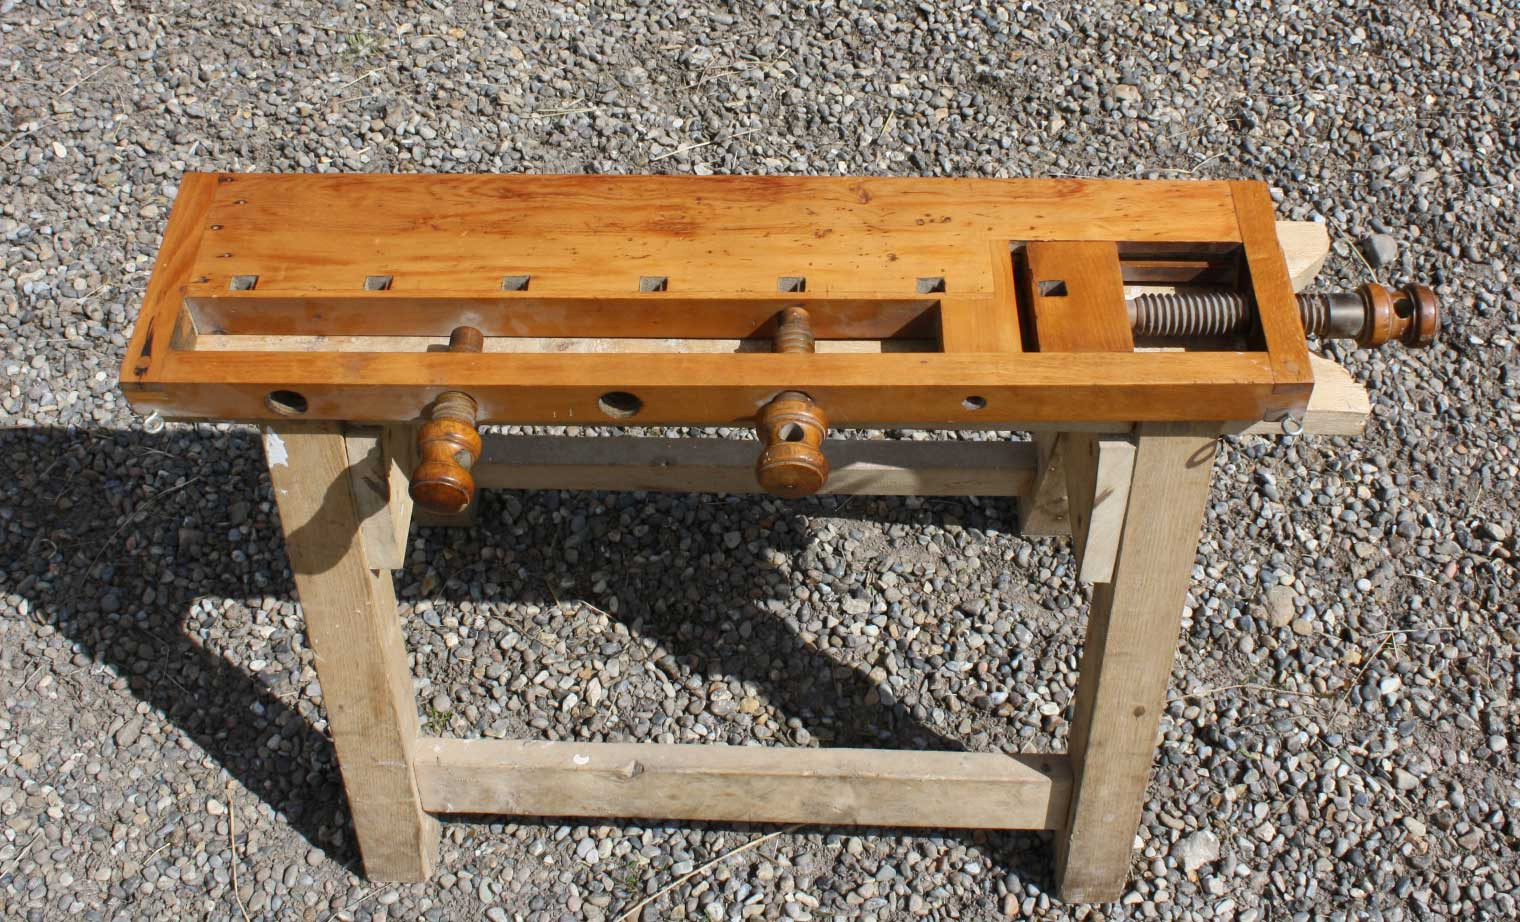 Wood Work Bench DIY
 How to Build Woodworking Plans Portable Work Bench Plans